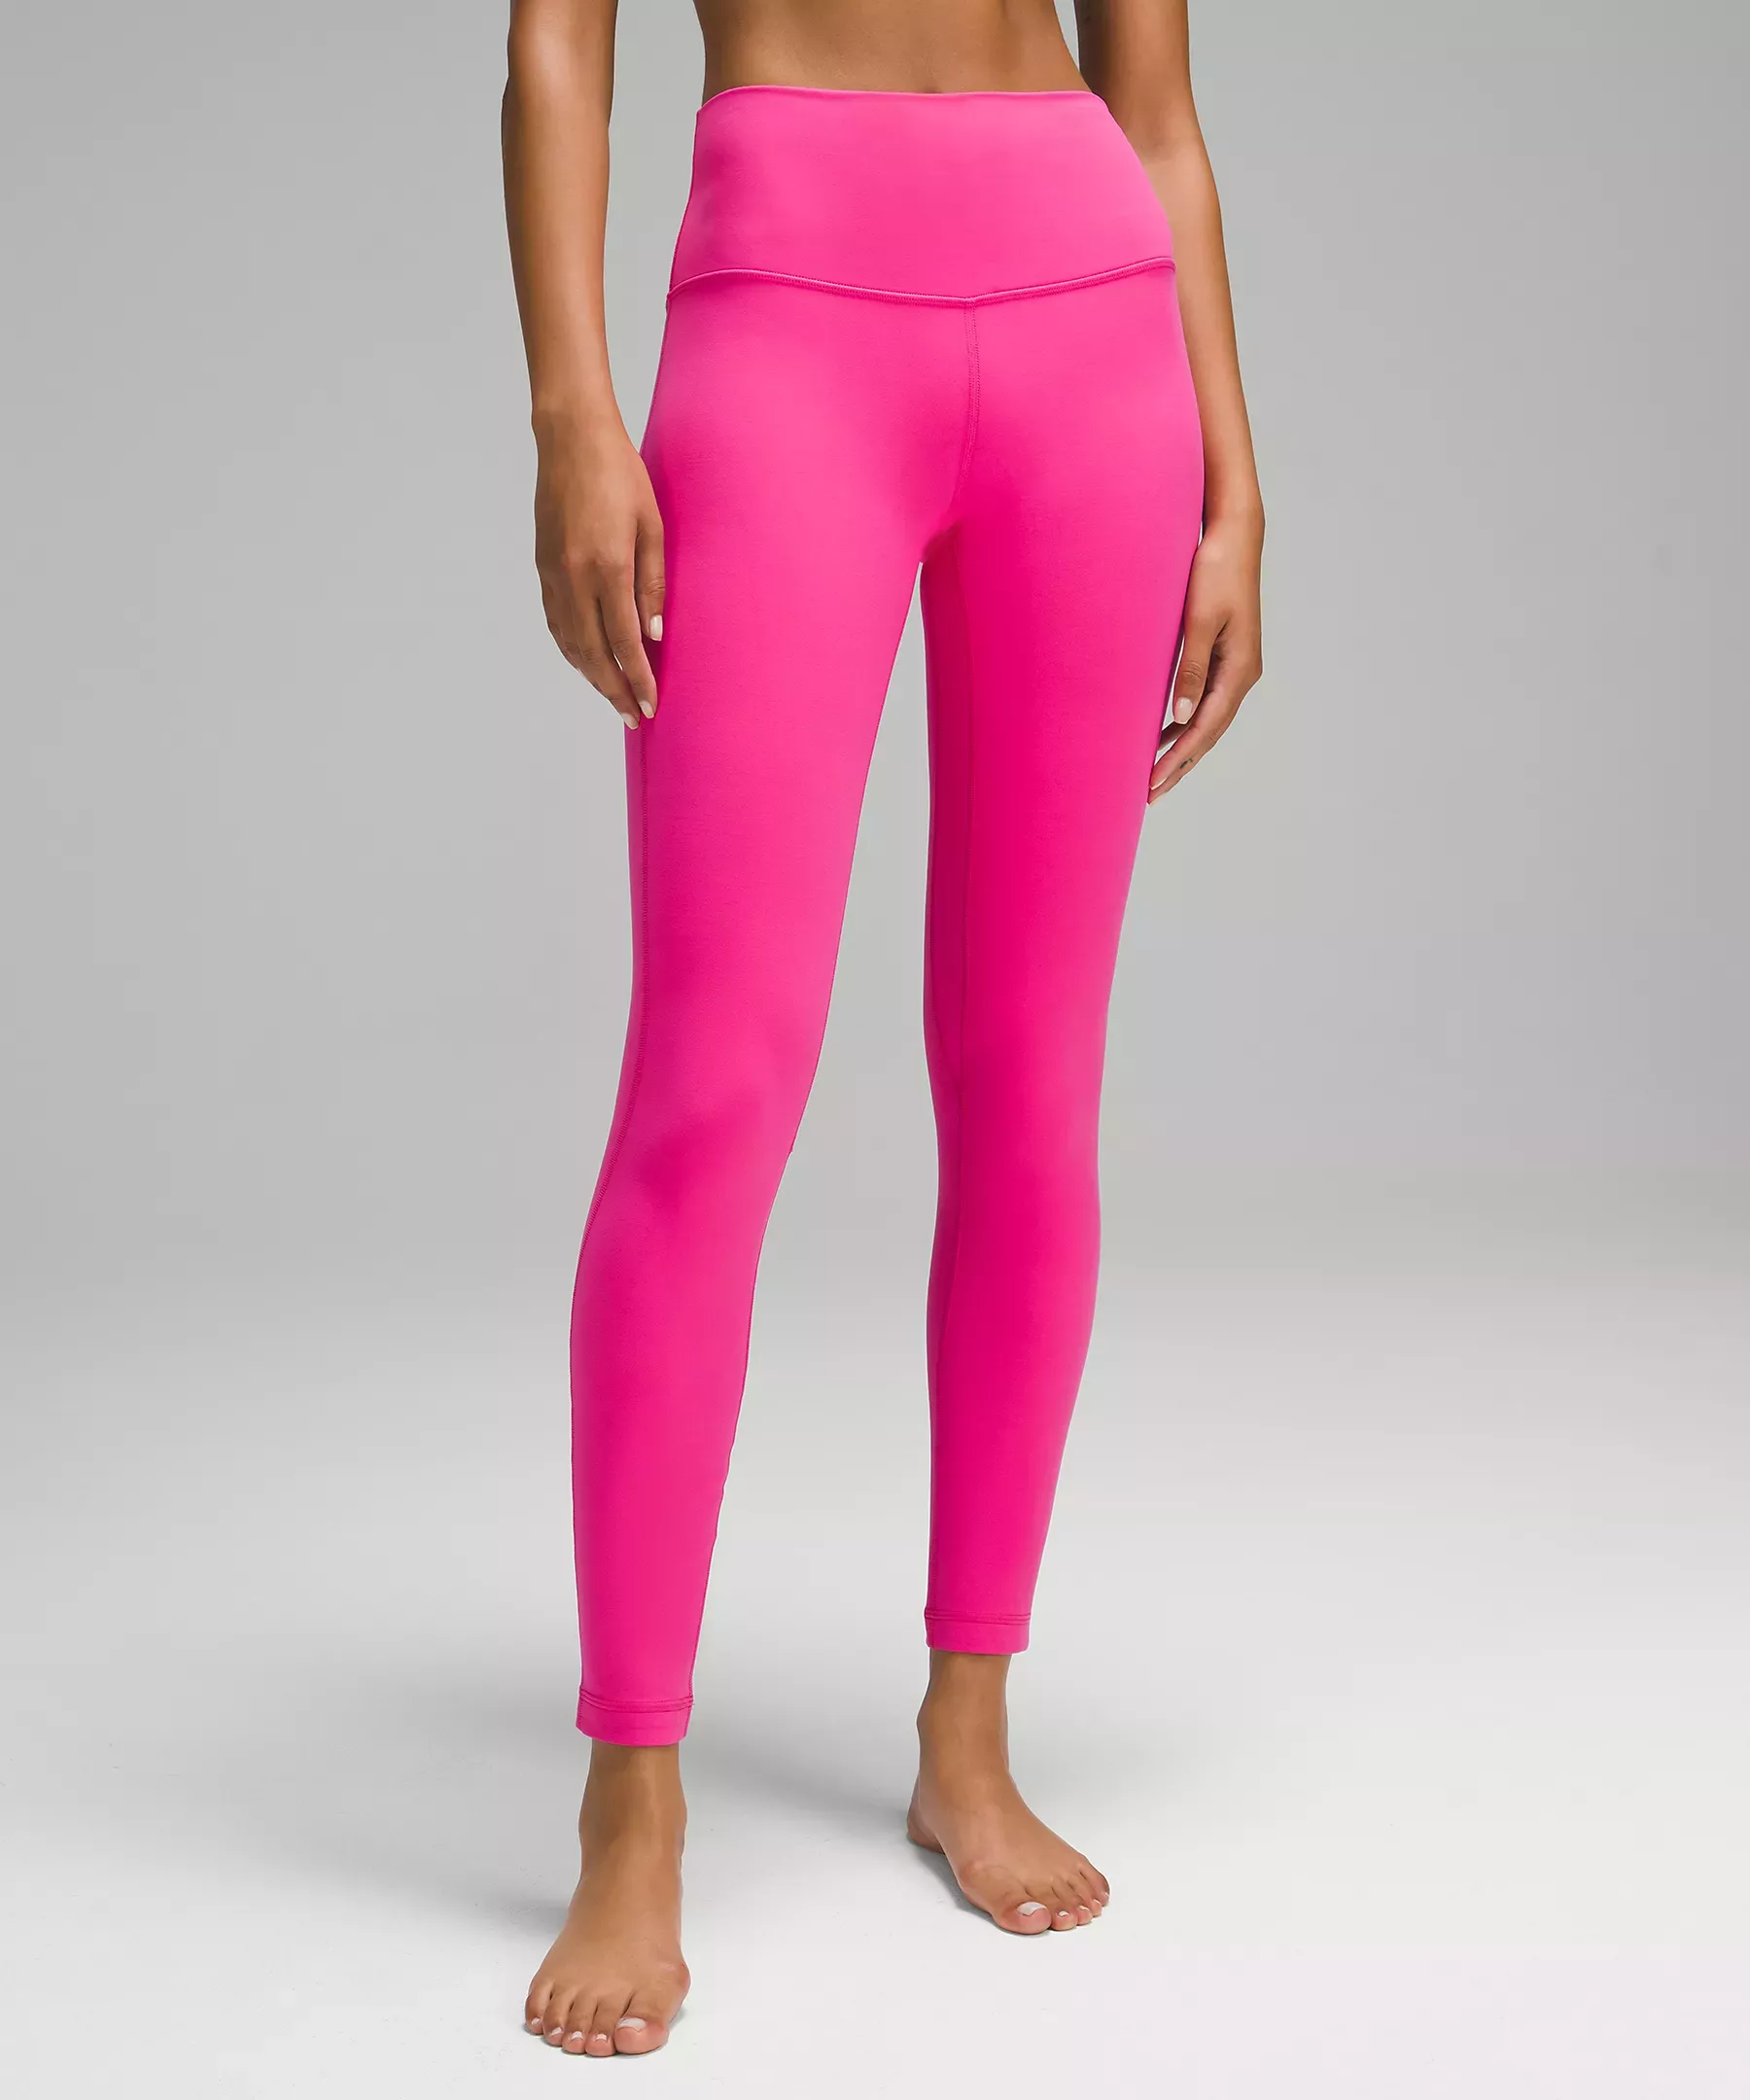 lululemon Align™ High-Rise Pant 24 *Asia Fit, Pink Taupe